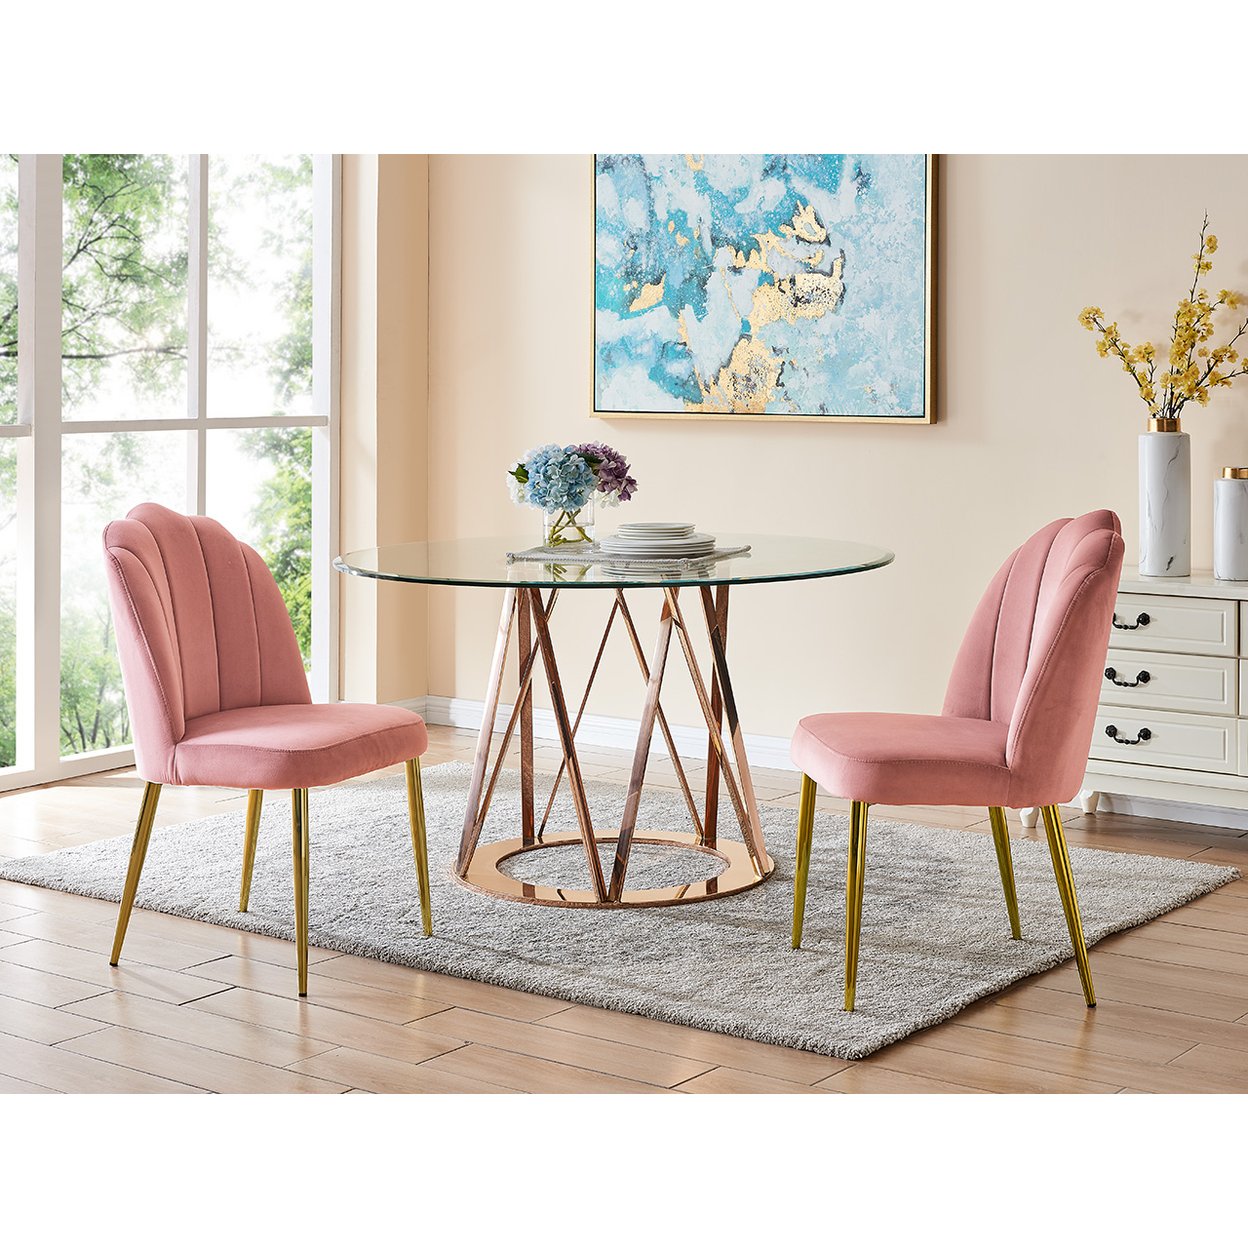 Iconic Home Chell Dining Side Chair Quilted Velvet Upholstered Crown Top Back And Seat Solid Gold Tone Metal Legs (Set Of 2) - Blush